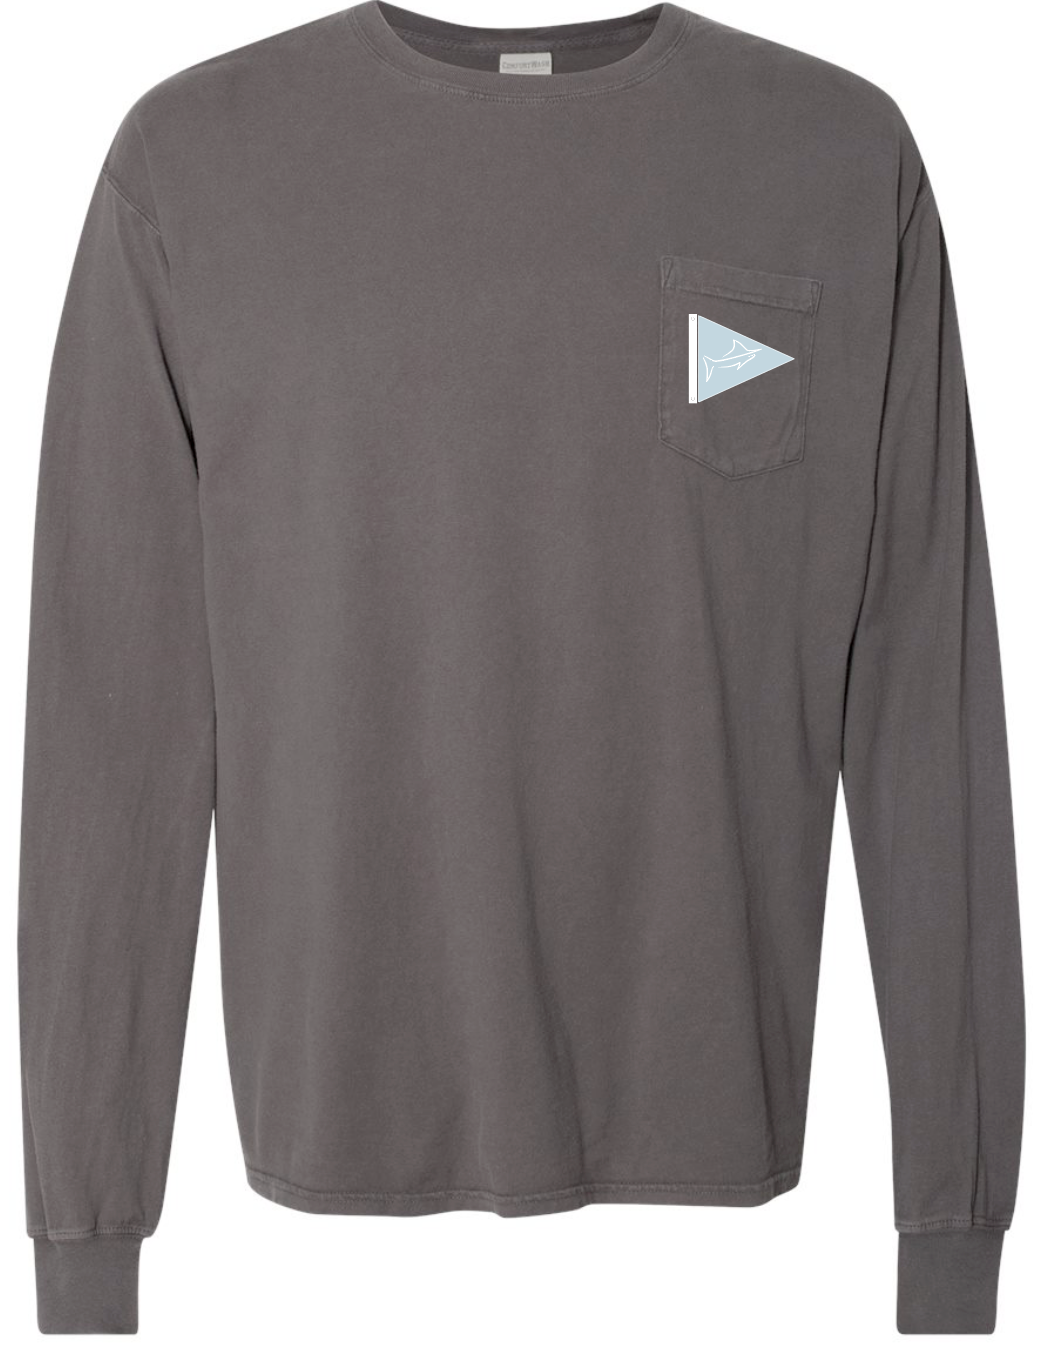 Boat Builders Trading Co. Walkaround Long Sleeve - Seamist Large